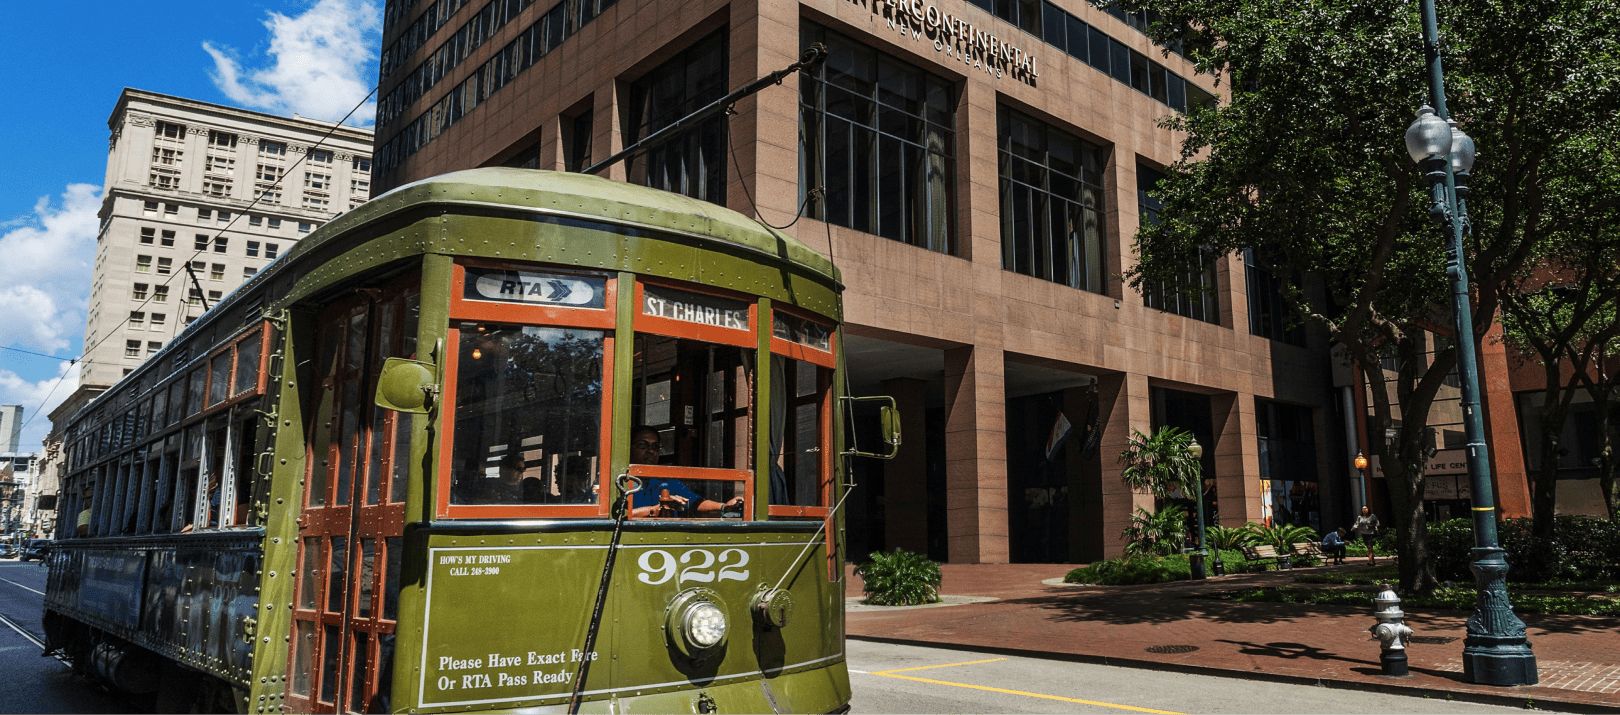 New Orleans Streetcar in front of InterContinental New Orleans